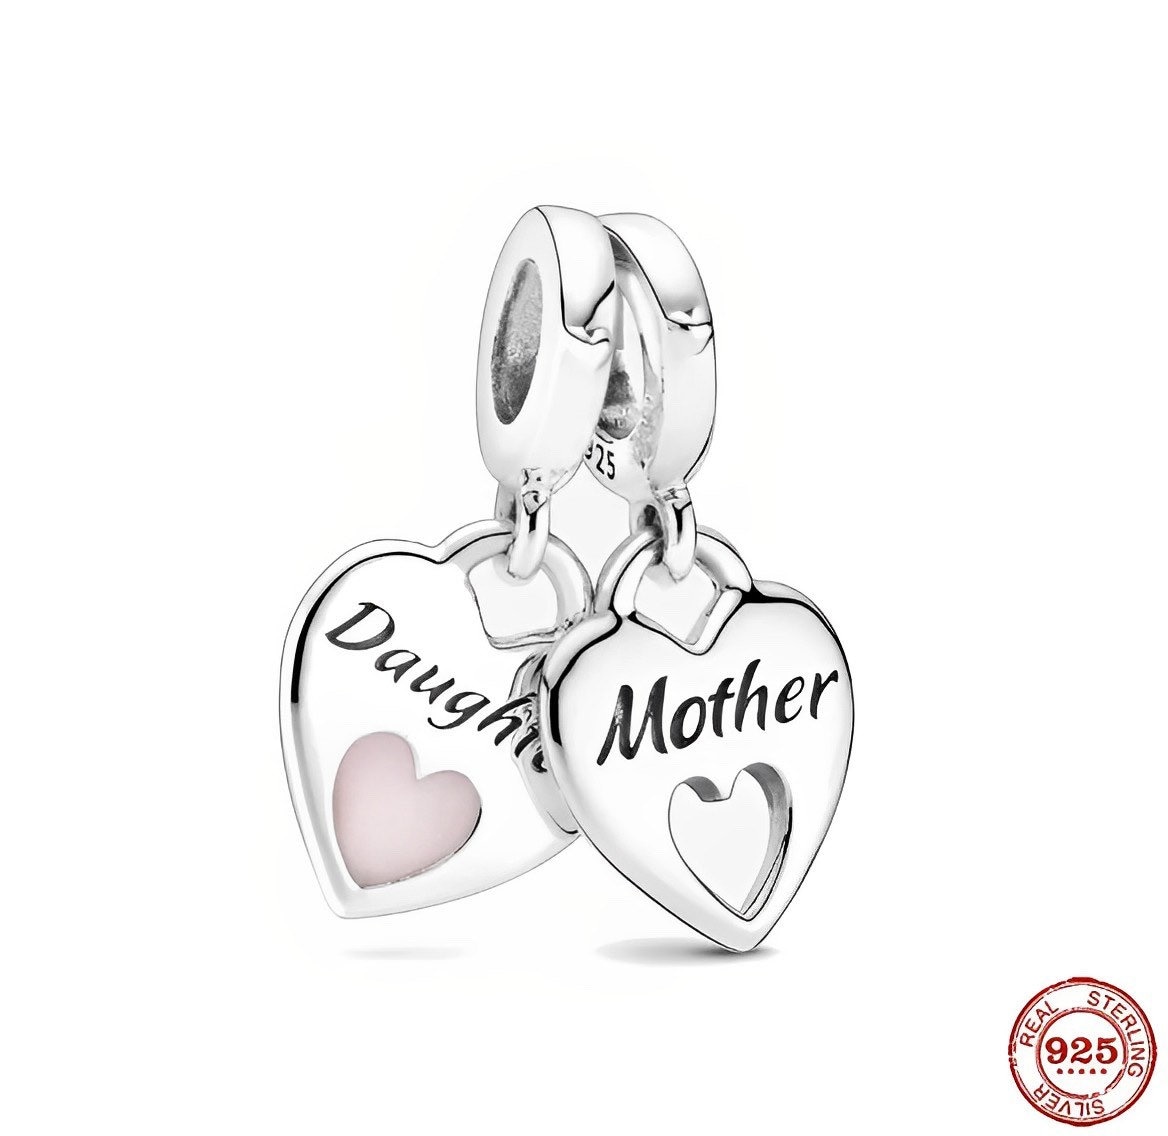 Gnoce Daughters Heart Charm